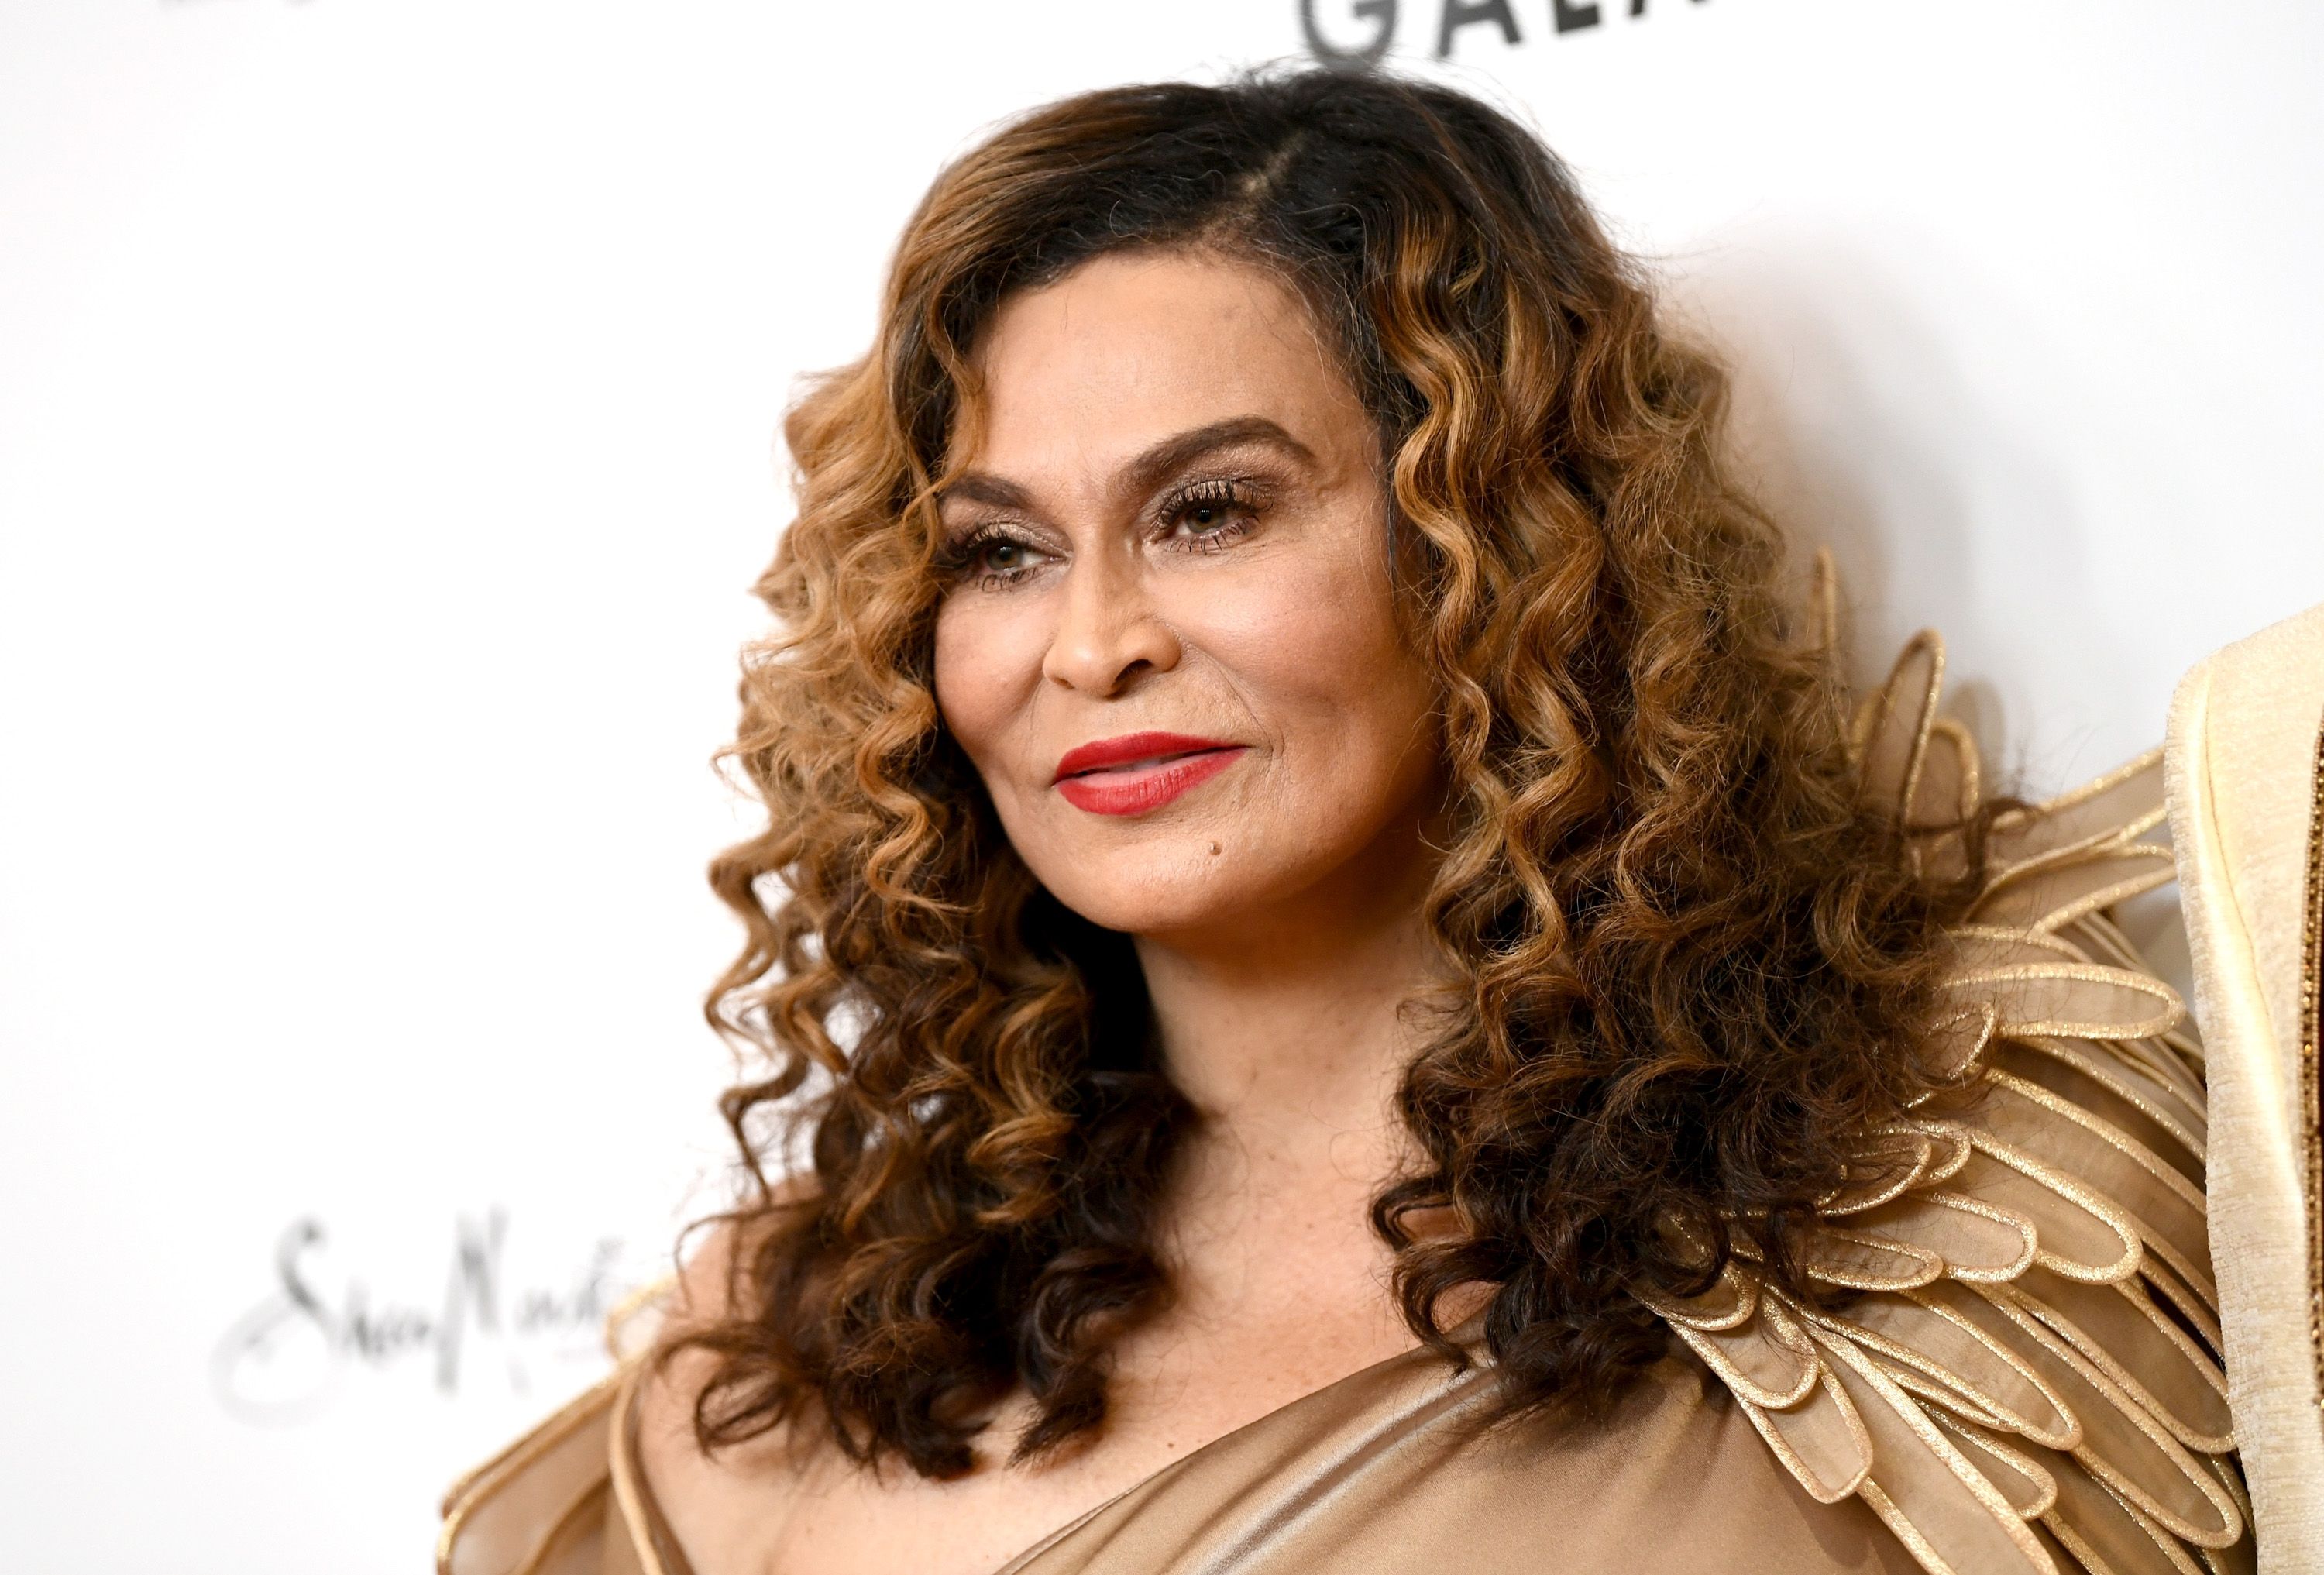 Tina Knowles at WACO Theater's 2nd Annual Wearable Art Gala on March 17, 2018 in Los Angeles, California | Photo: Getty Images